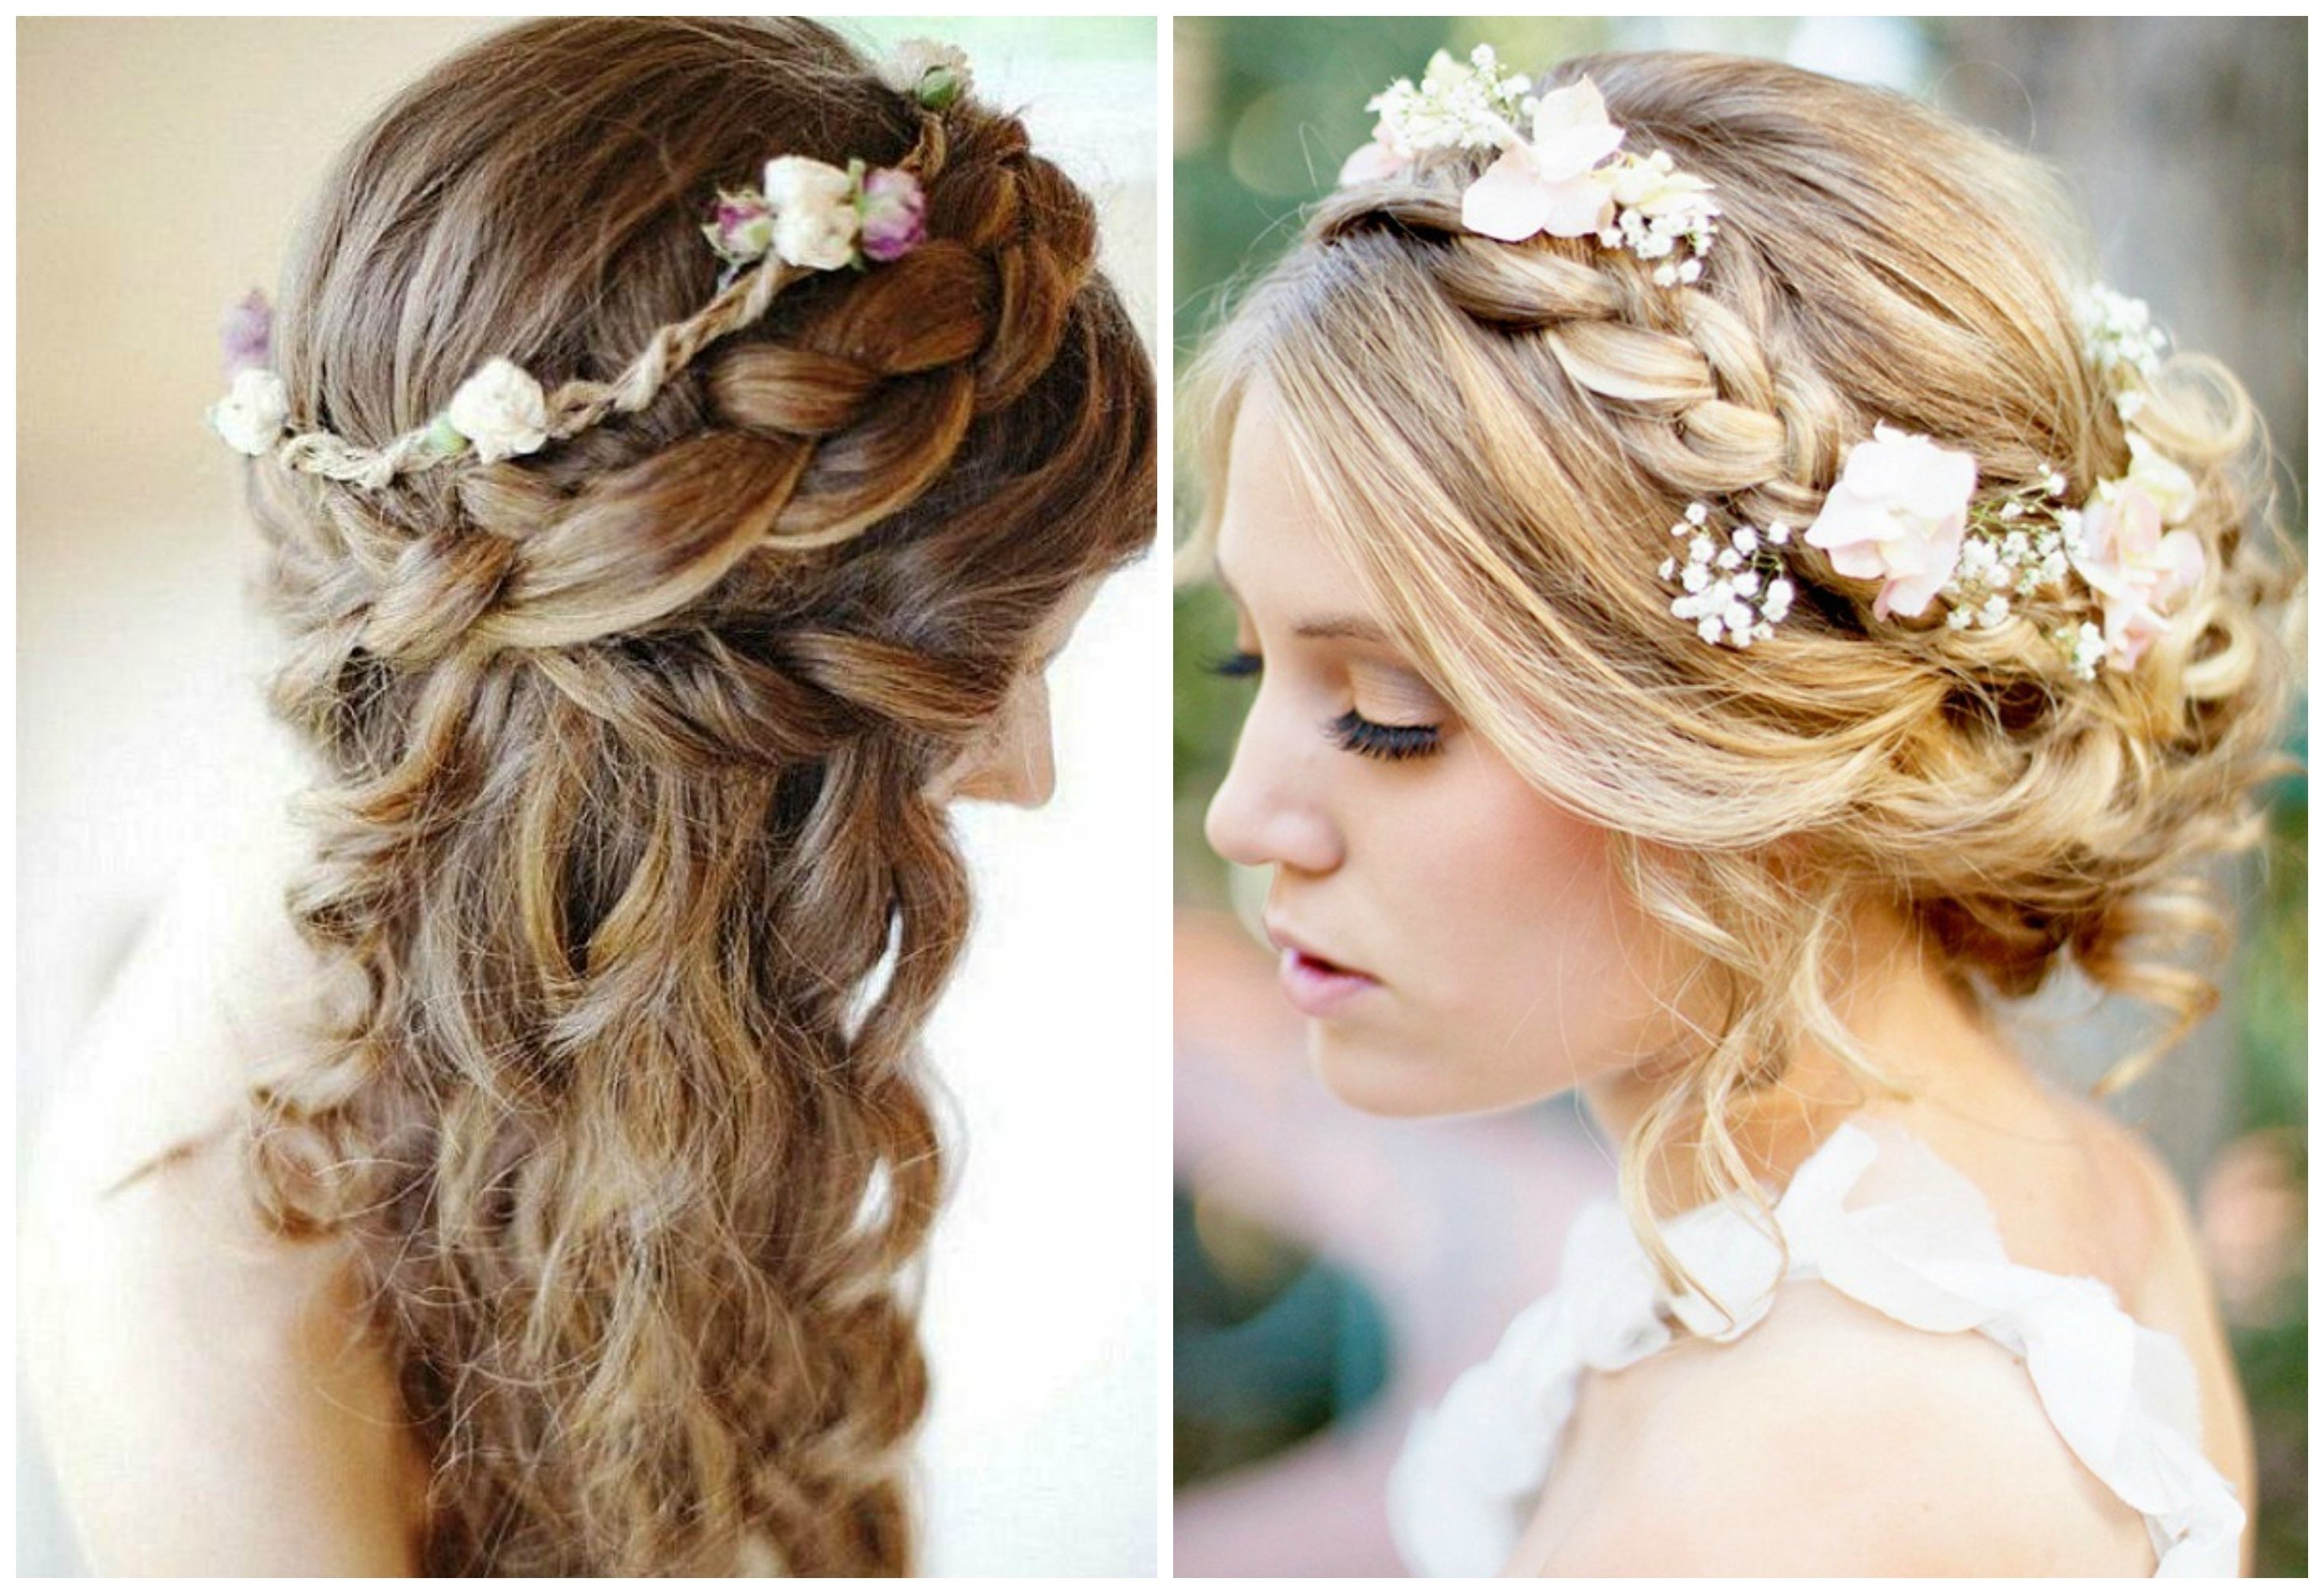 2018 Quirky Wedding Hairstyles With Hairstyles For The Boho Bride – Wedding Planning Buckinghamshire And (View 7 of 15)